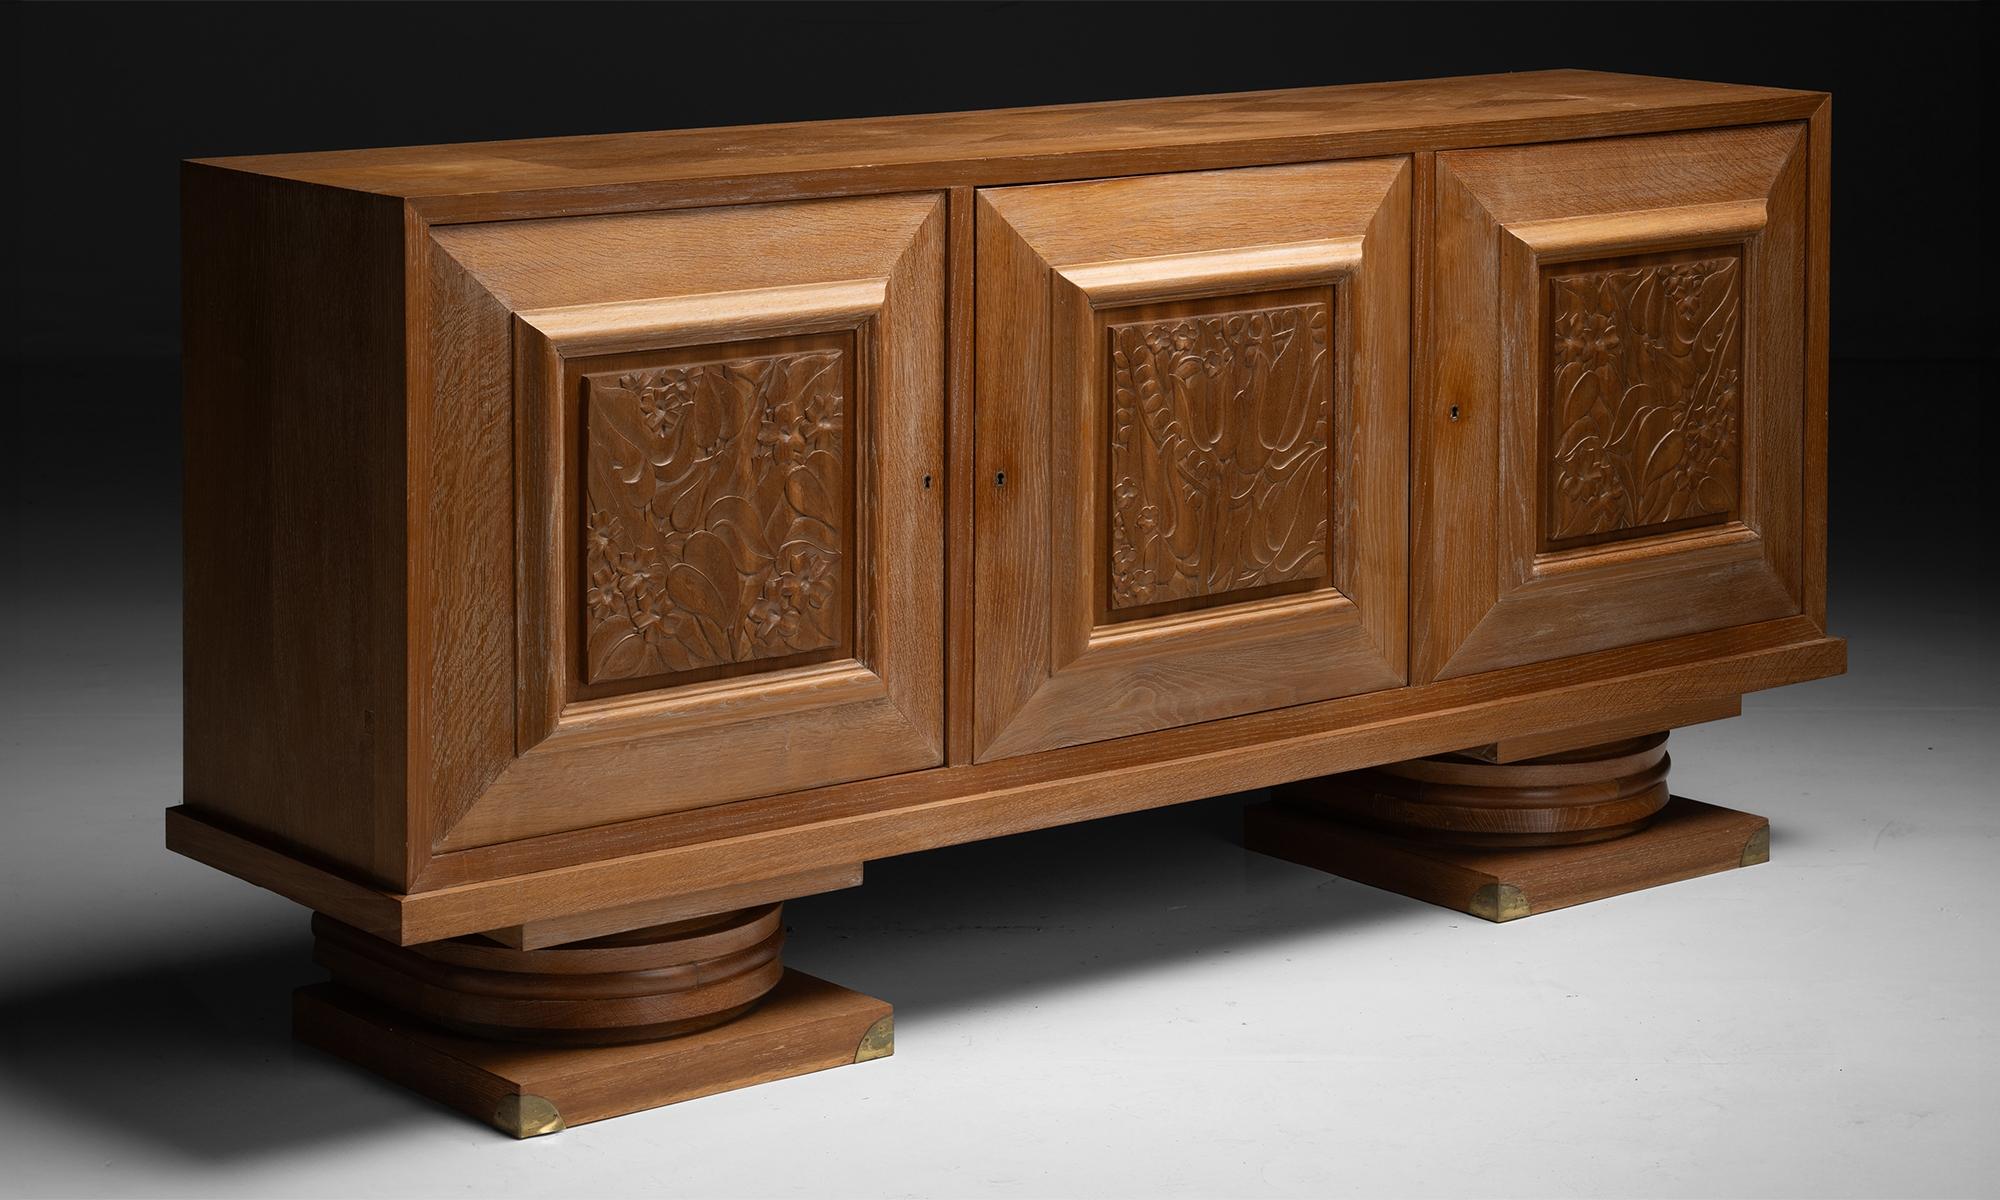 France circa 1940

Constructed in oak with parquet top, floral carving on doors, shelving and drawers on the inside.

87”L x 20.75”d x 40.75”h